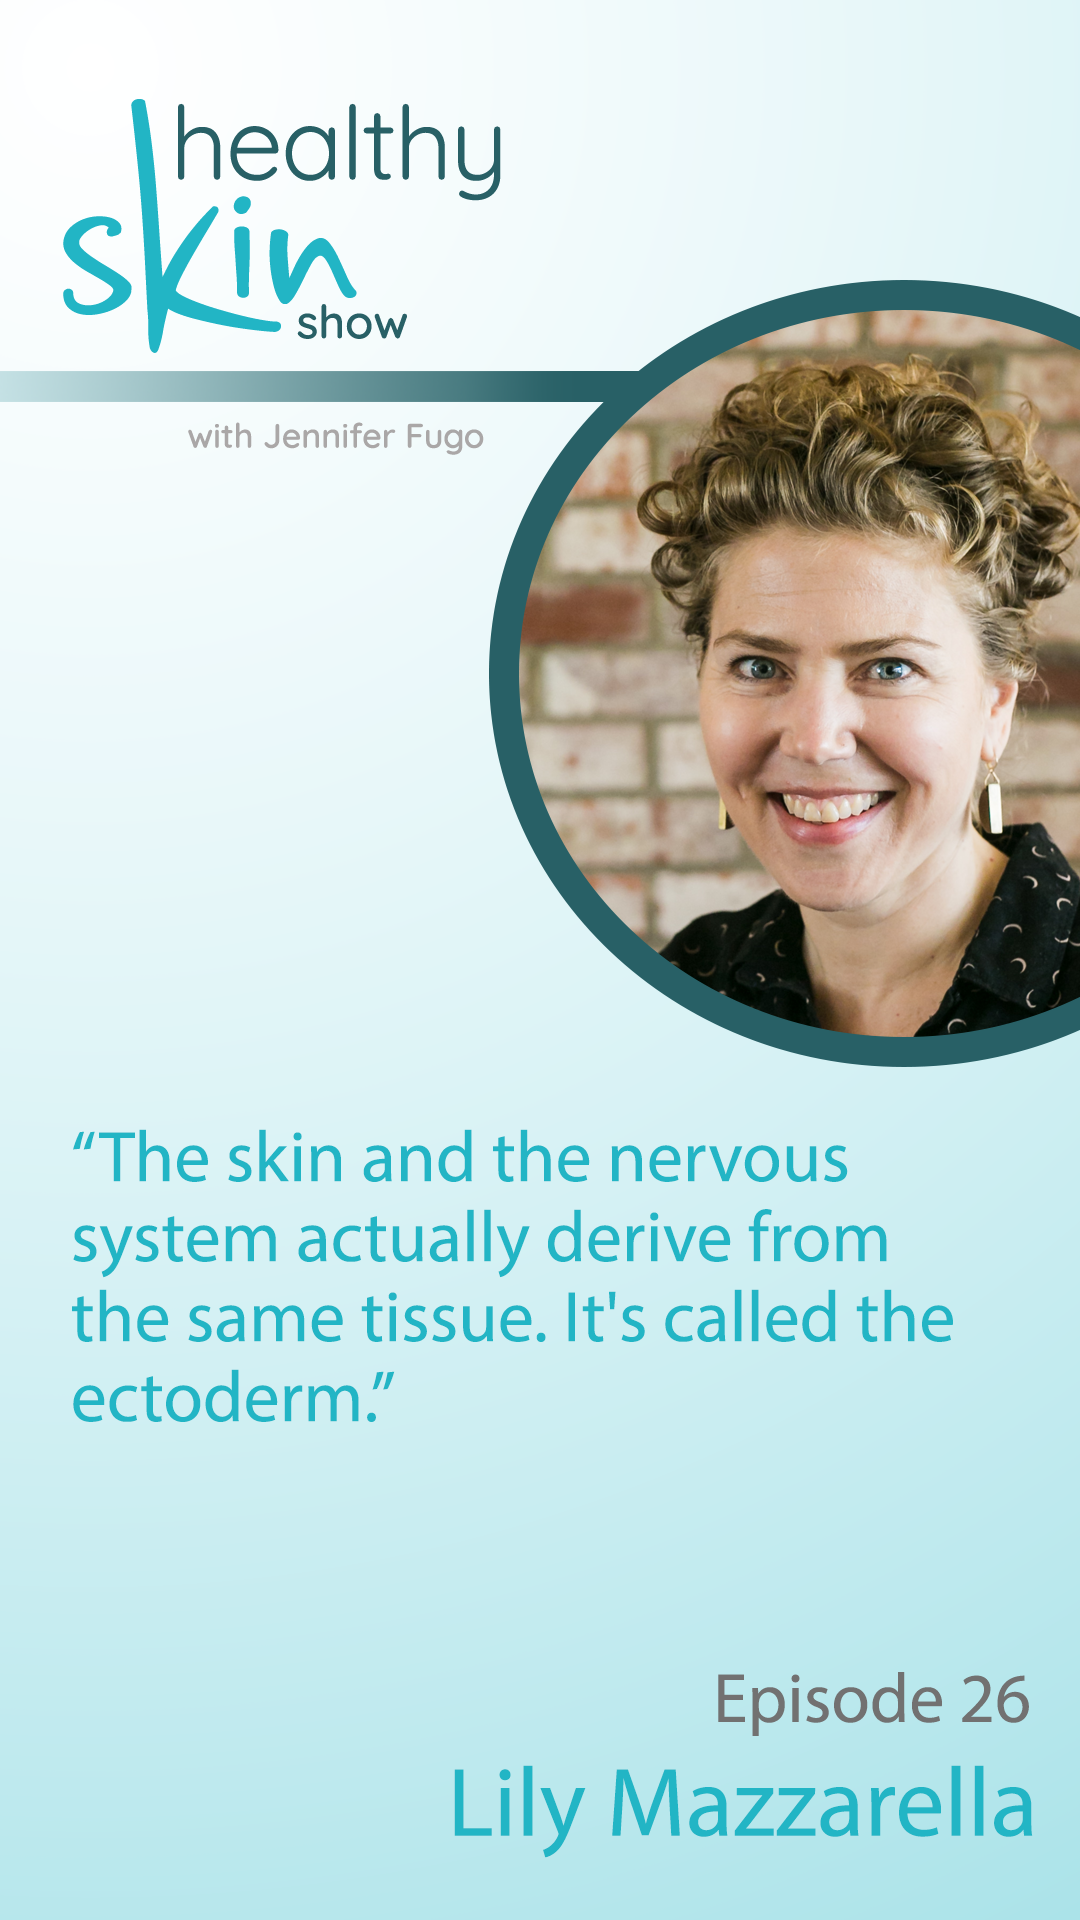 “The skin and the nervous system actually derive from the same tissue. It's called the ectoderm.”